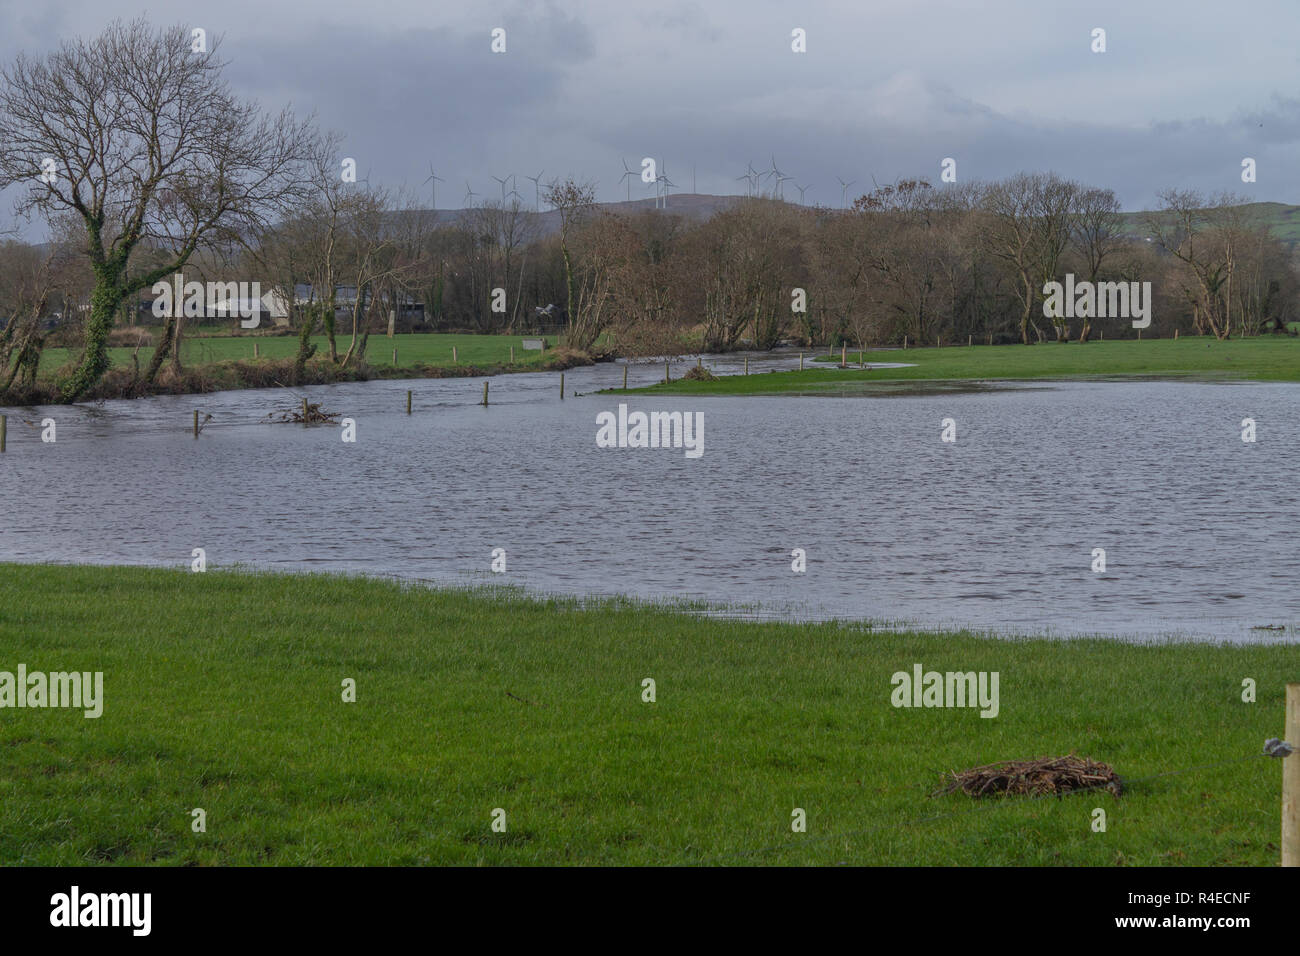 Skibbereen, West Cork, Ireland, November 27th 2018. The overnight torrential rain caused the River Ilen above Skibbereen to burst its banks. So far the new flood defences for the town are working, but more heavy rain may put them to a severe test.    Credit: aphperspective/Alamy Live News Stock Photo